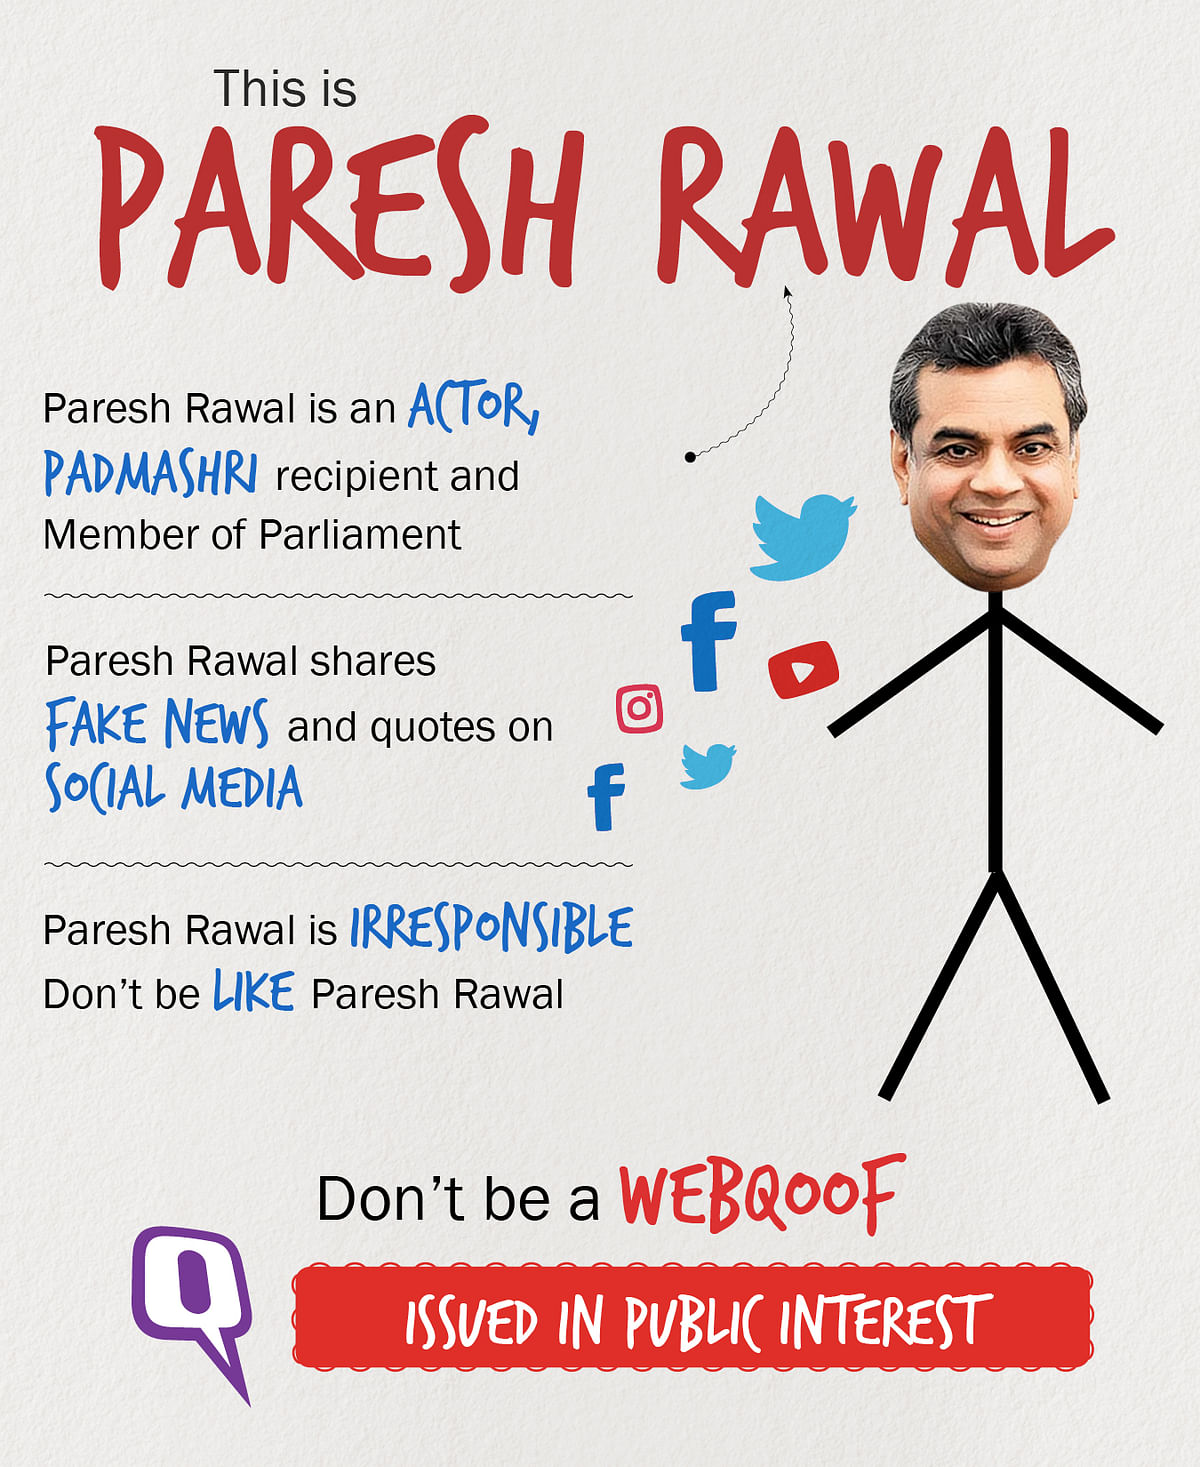 Why Paresh Rawal needs to do a bit of fact-checking before sharing news and quotes on social media.